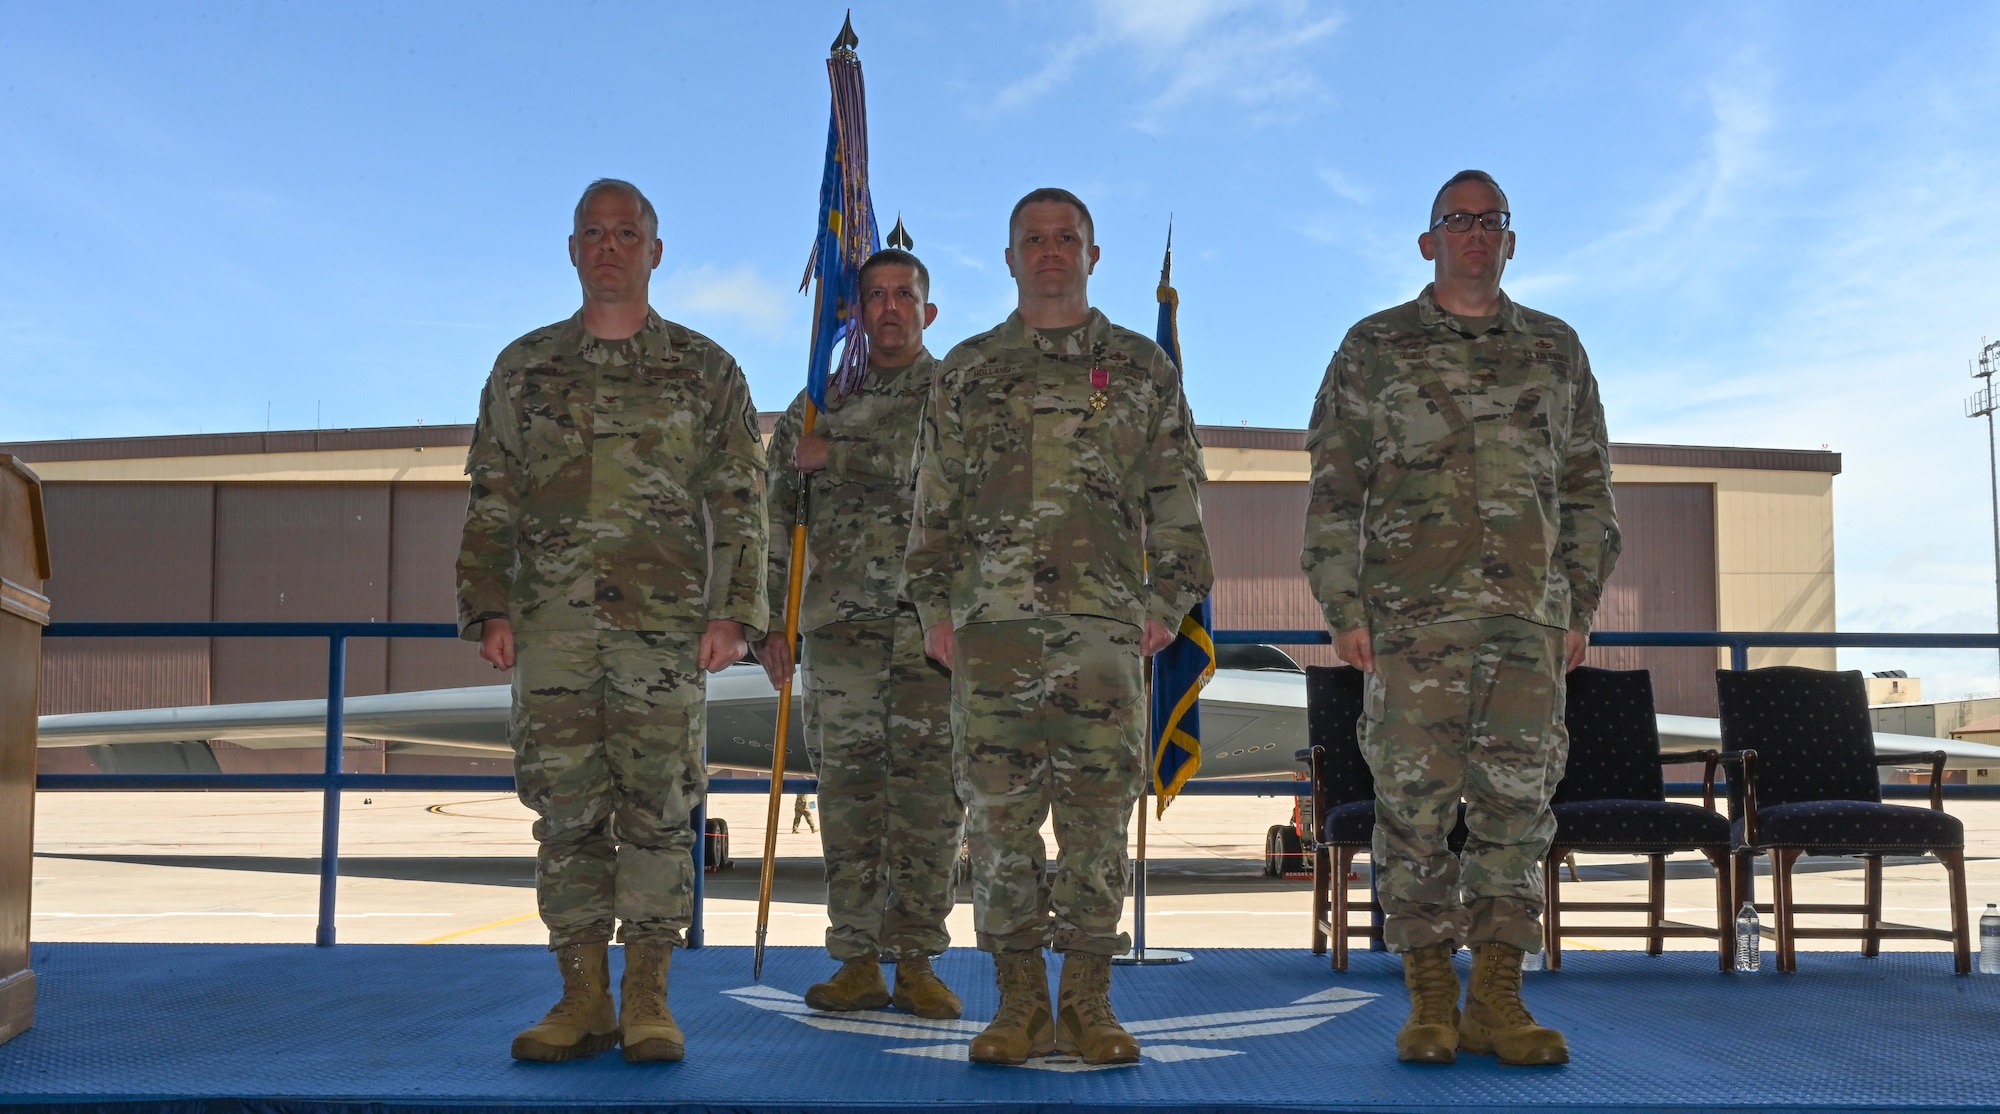 U.S. Air Force Col. Daniel Diehl, 509th Bomb Wing commander, presents U.S. Air Force Col. Jeffery Holland, 509th Maintenance Group commander, with the Legion of Merit Medal during the 509th MXG change of command ceremony on Whiteman Air Force Base, Missouri, June 6, 2022. Holland received the medal for his contributions to Team Whiteman and the 509th MXG during his command. (U.S. Air Force photo by Airman 1st Class Bryson Britt)